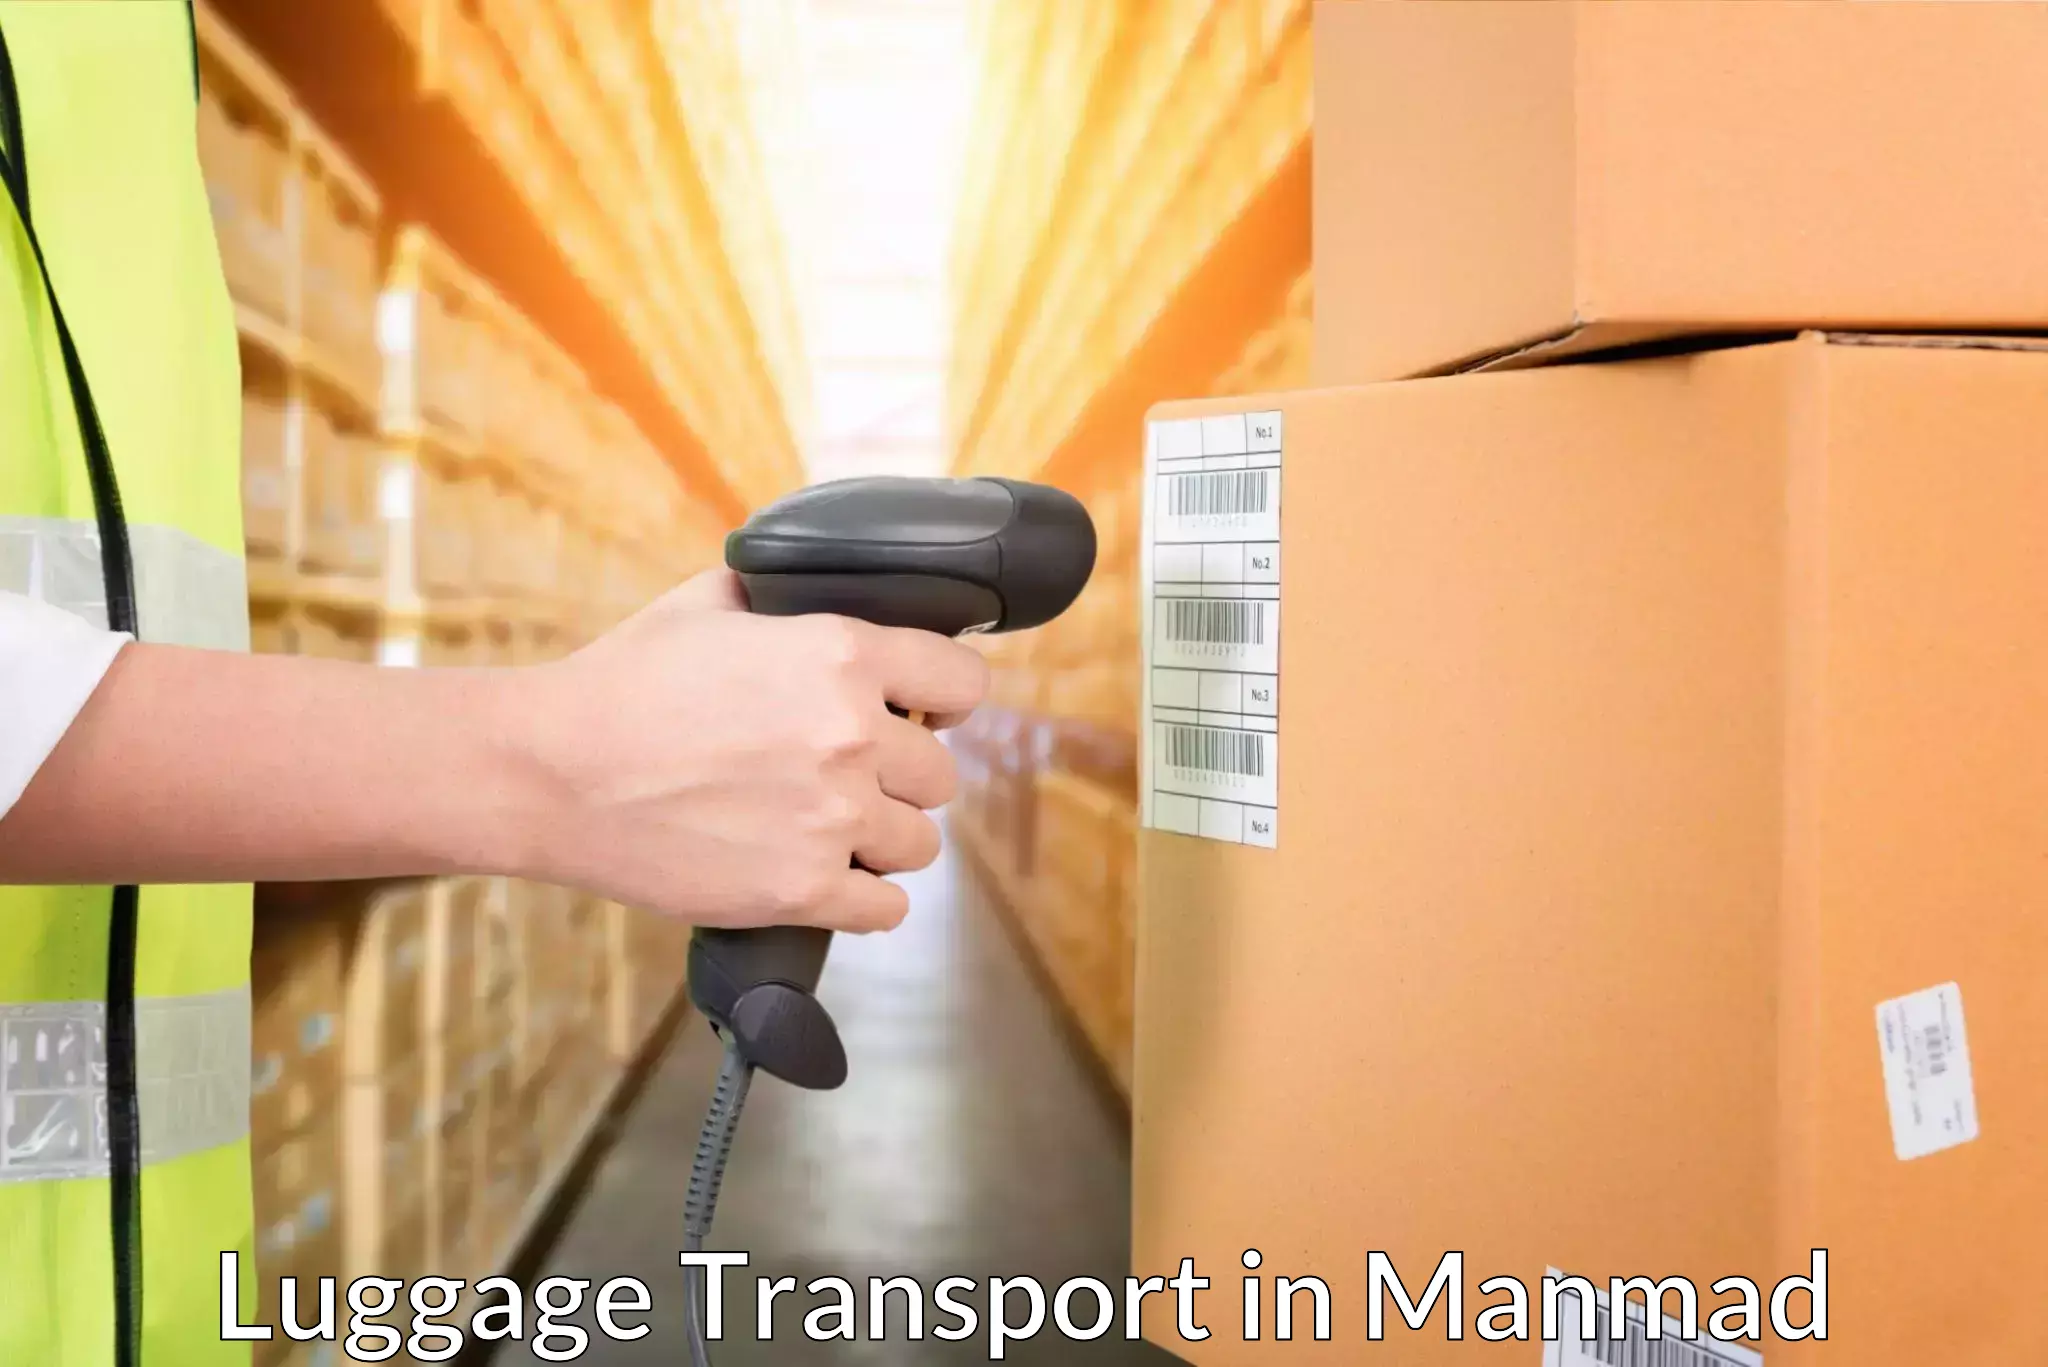 Luggage transport pricing in Manmad